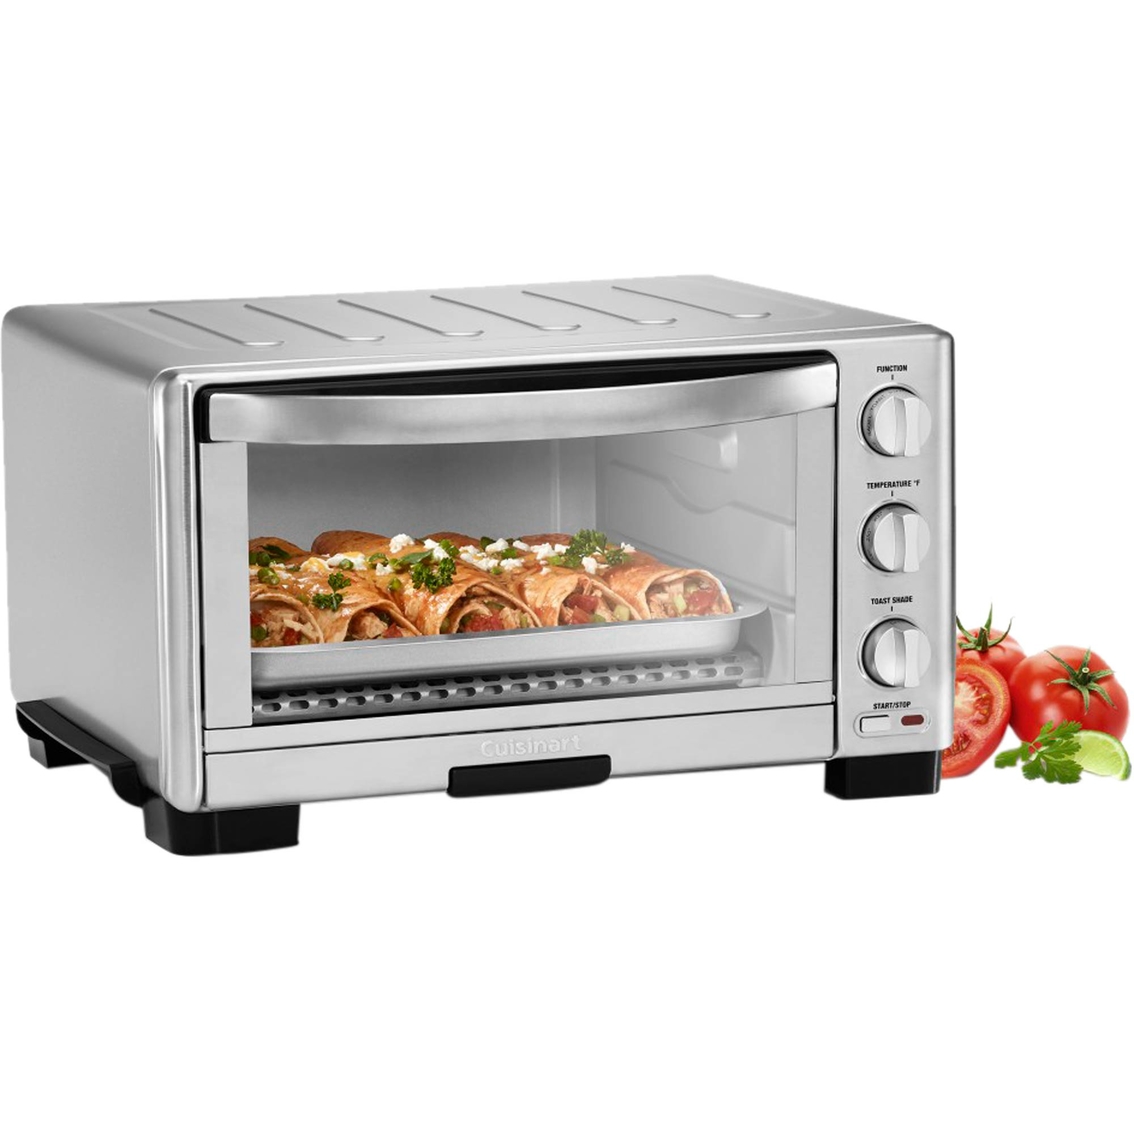 Cuisinart Toaster Oven Broiler - Image 4 of 5